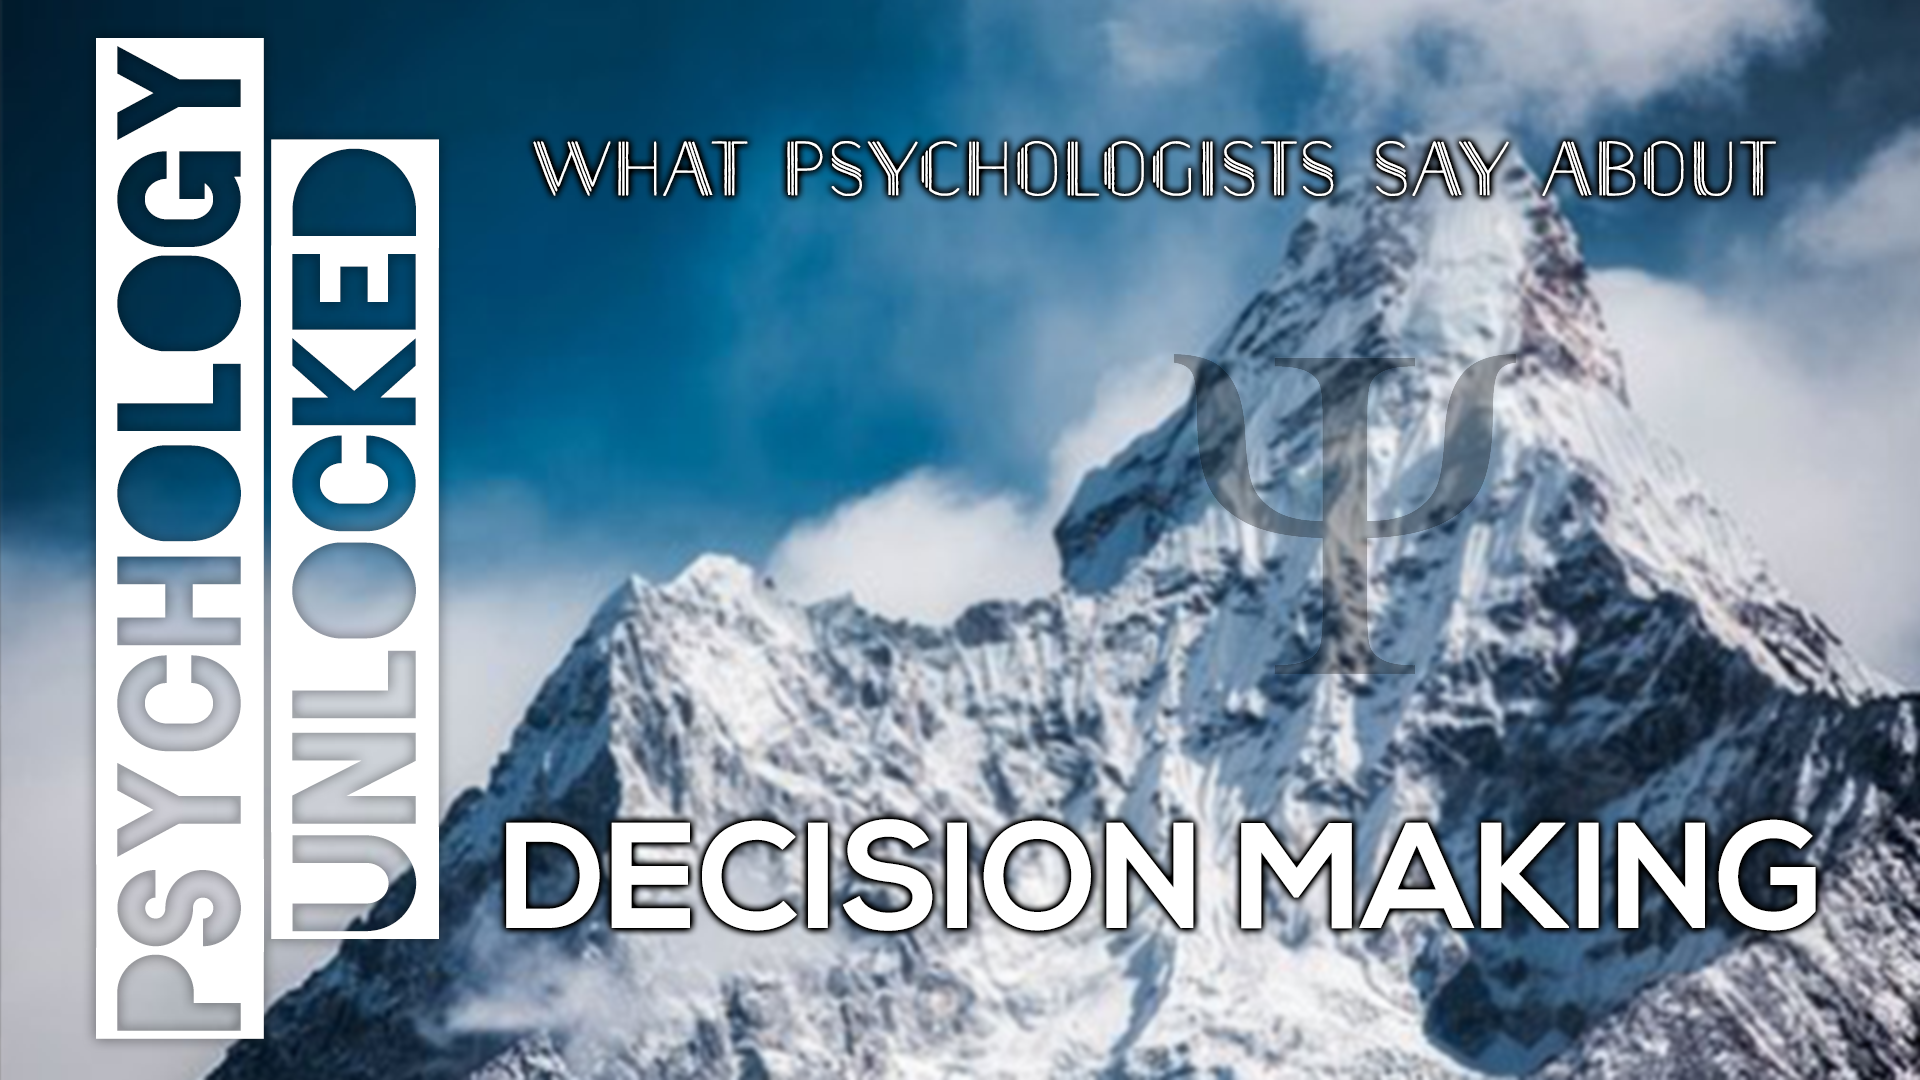 What psychologists say about decision making